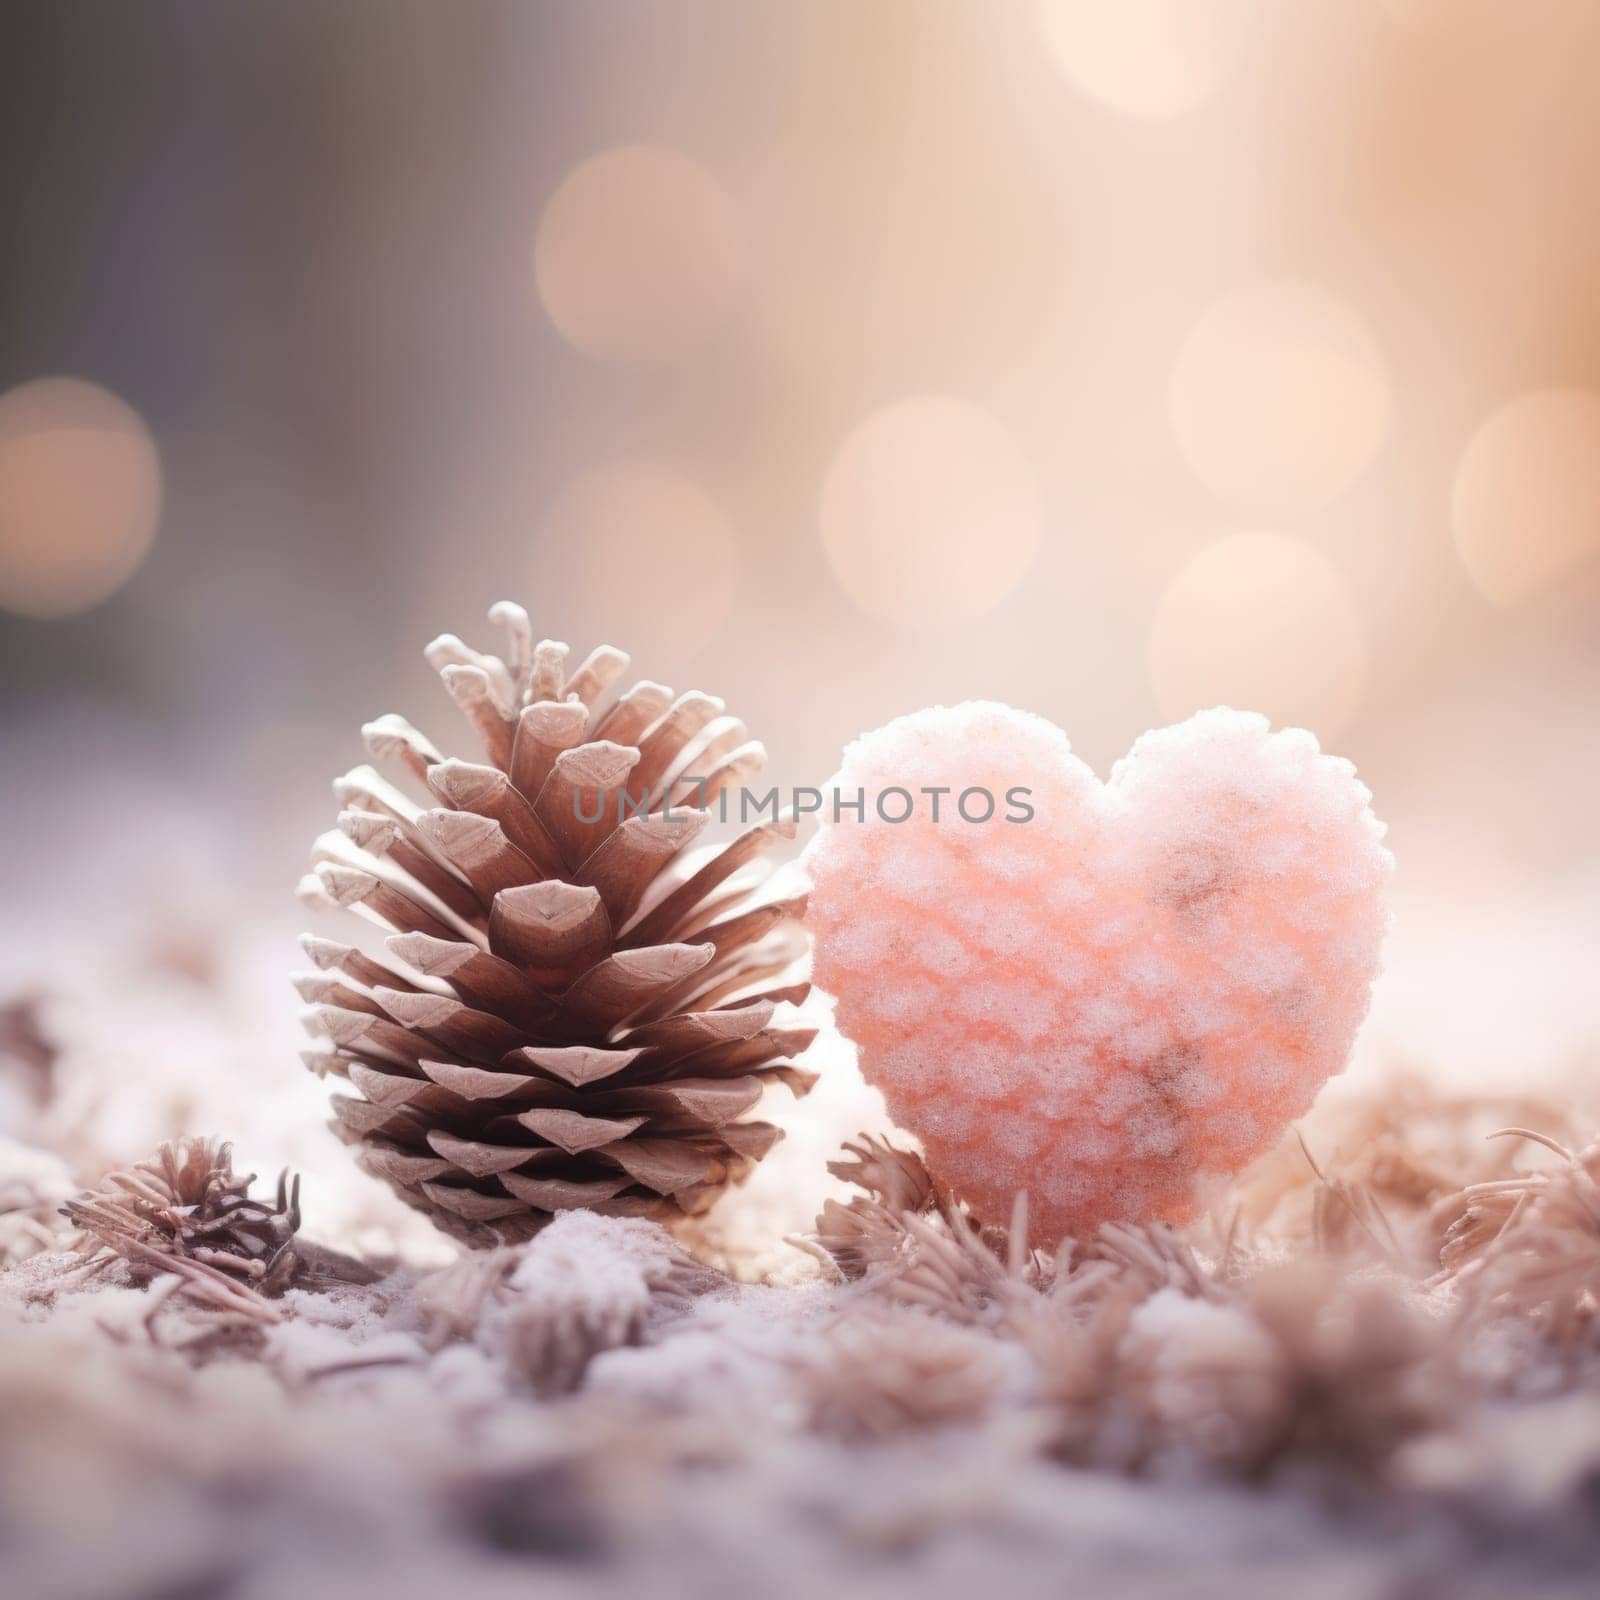 Heart shaped pine cones and heart shaped pine cones on a snowy background